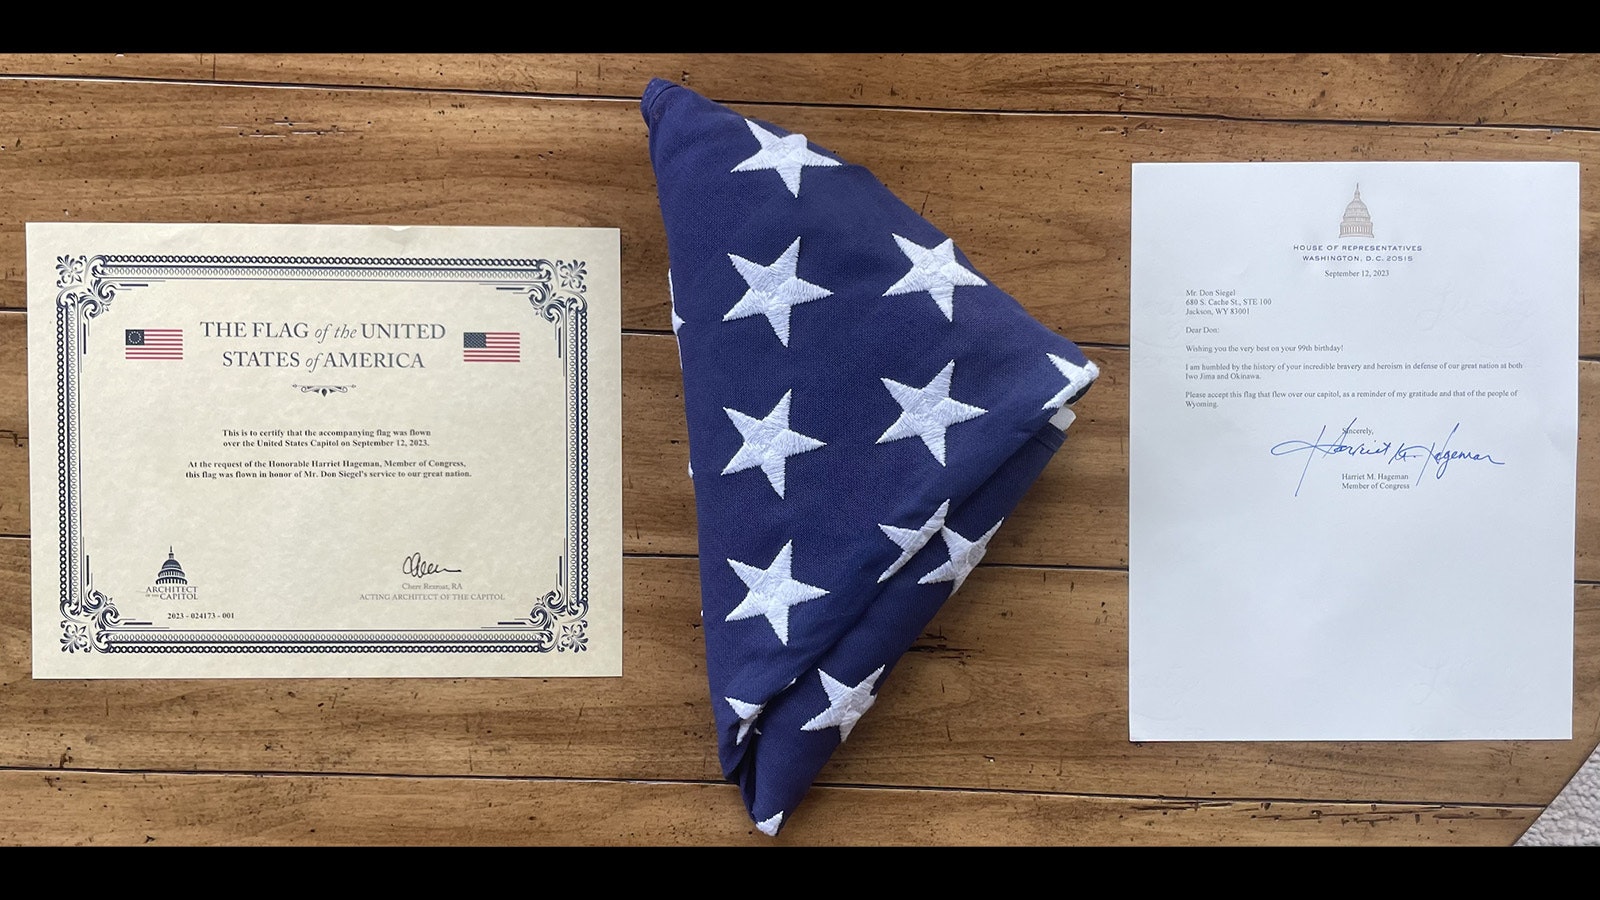 This flag was flown over the U.S. Capitol and sent to Donald Siegel in recognition of his service during World War II.